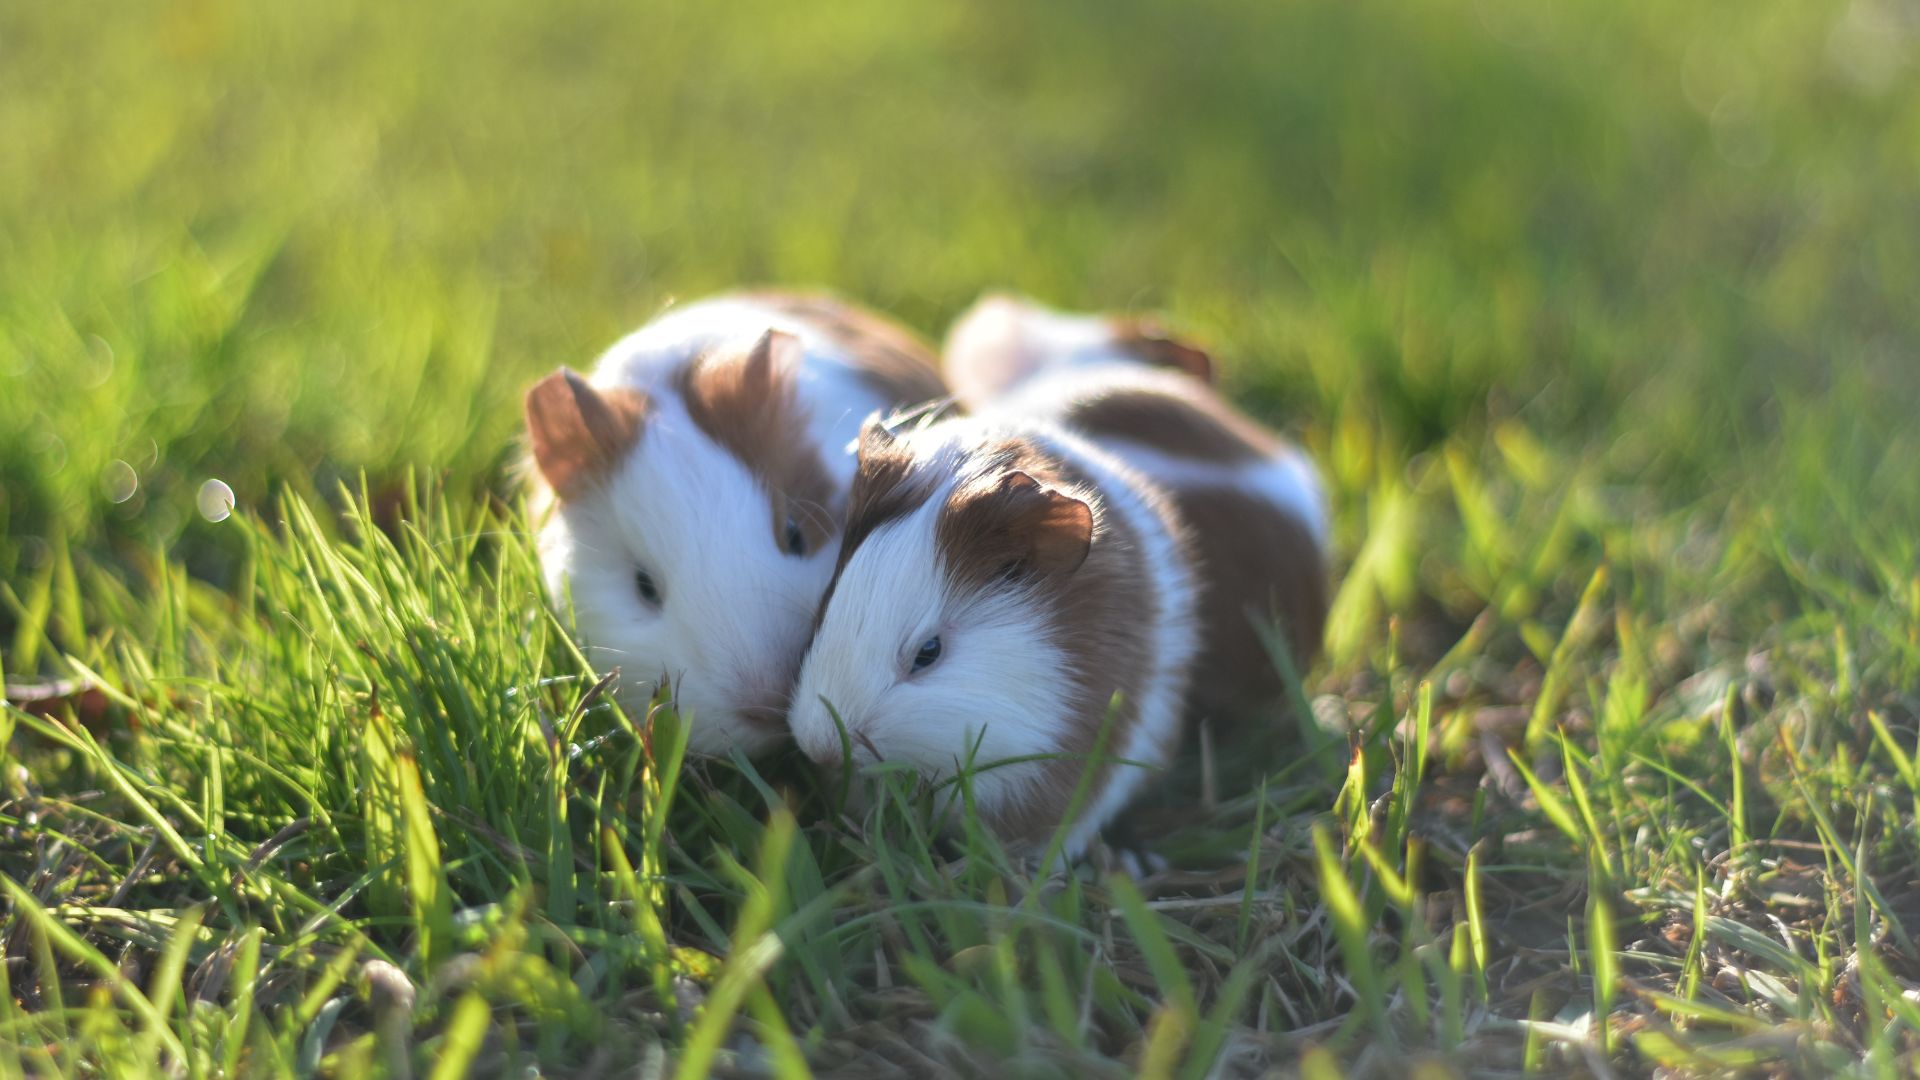 What risks could pet hamsters and gerbils pose in Australia? 